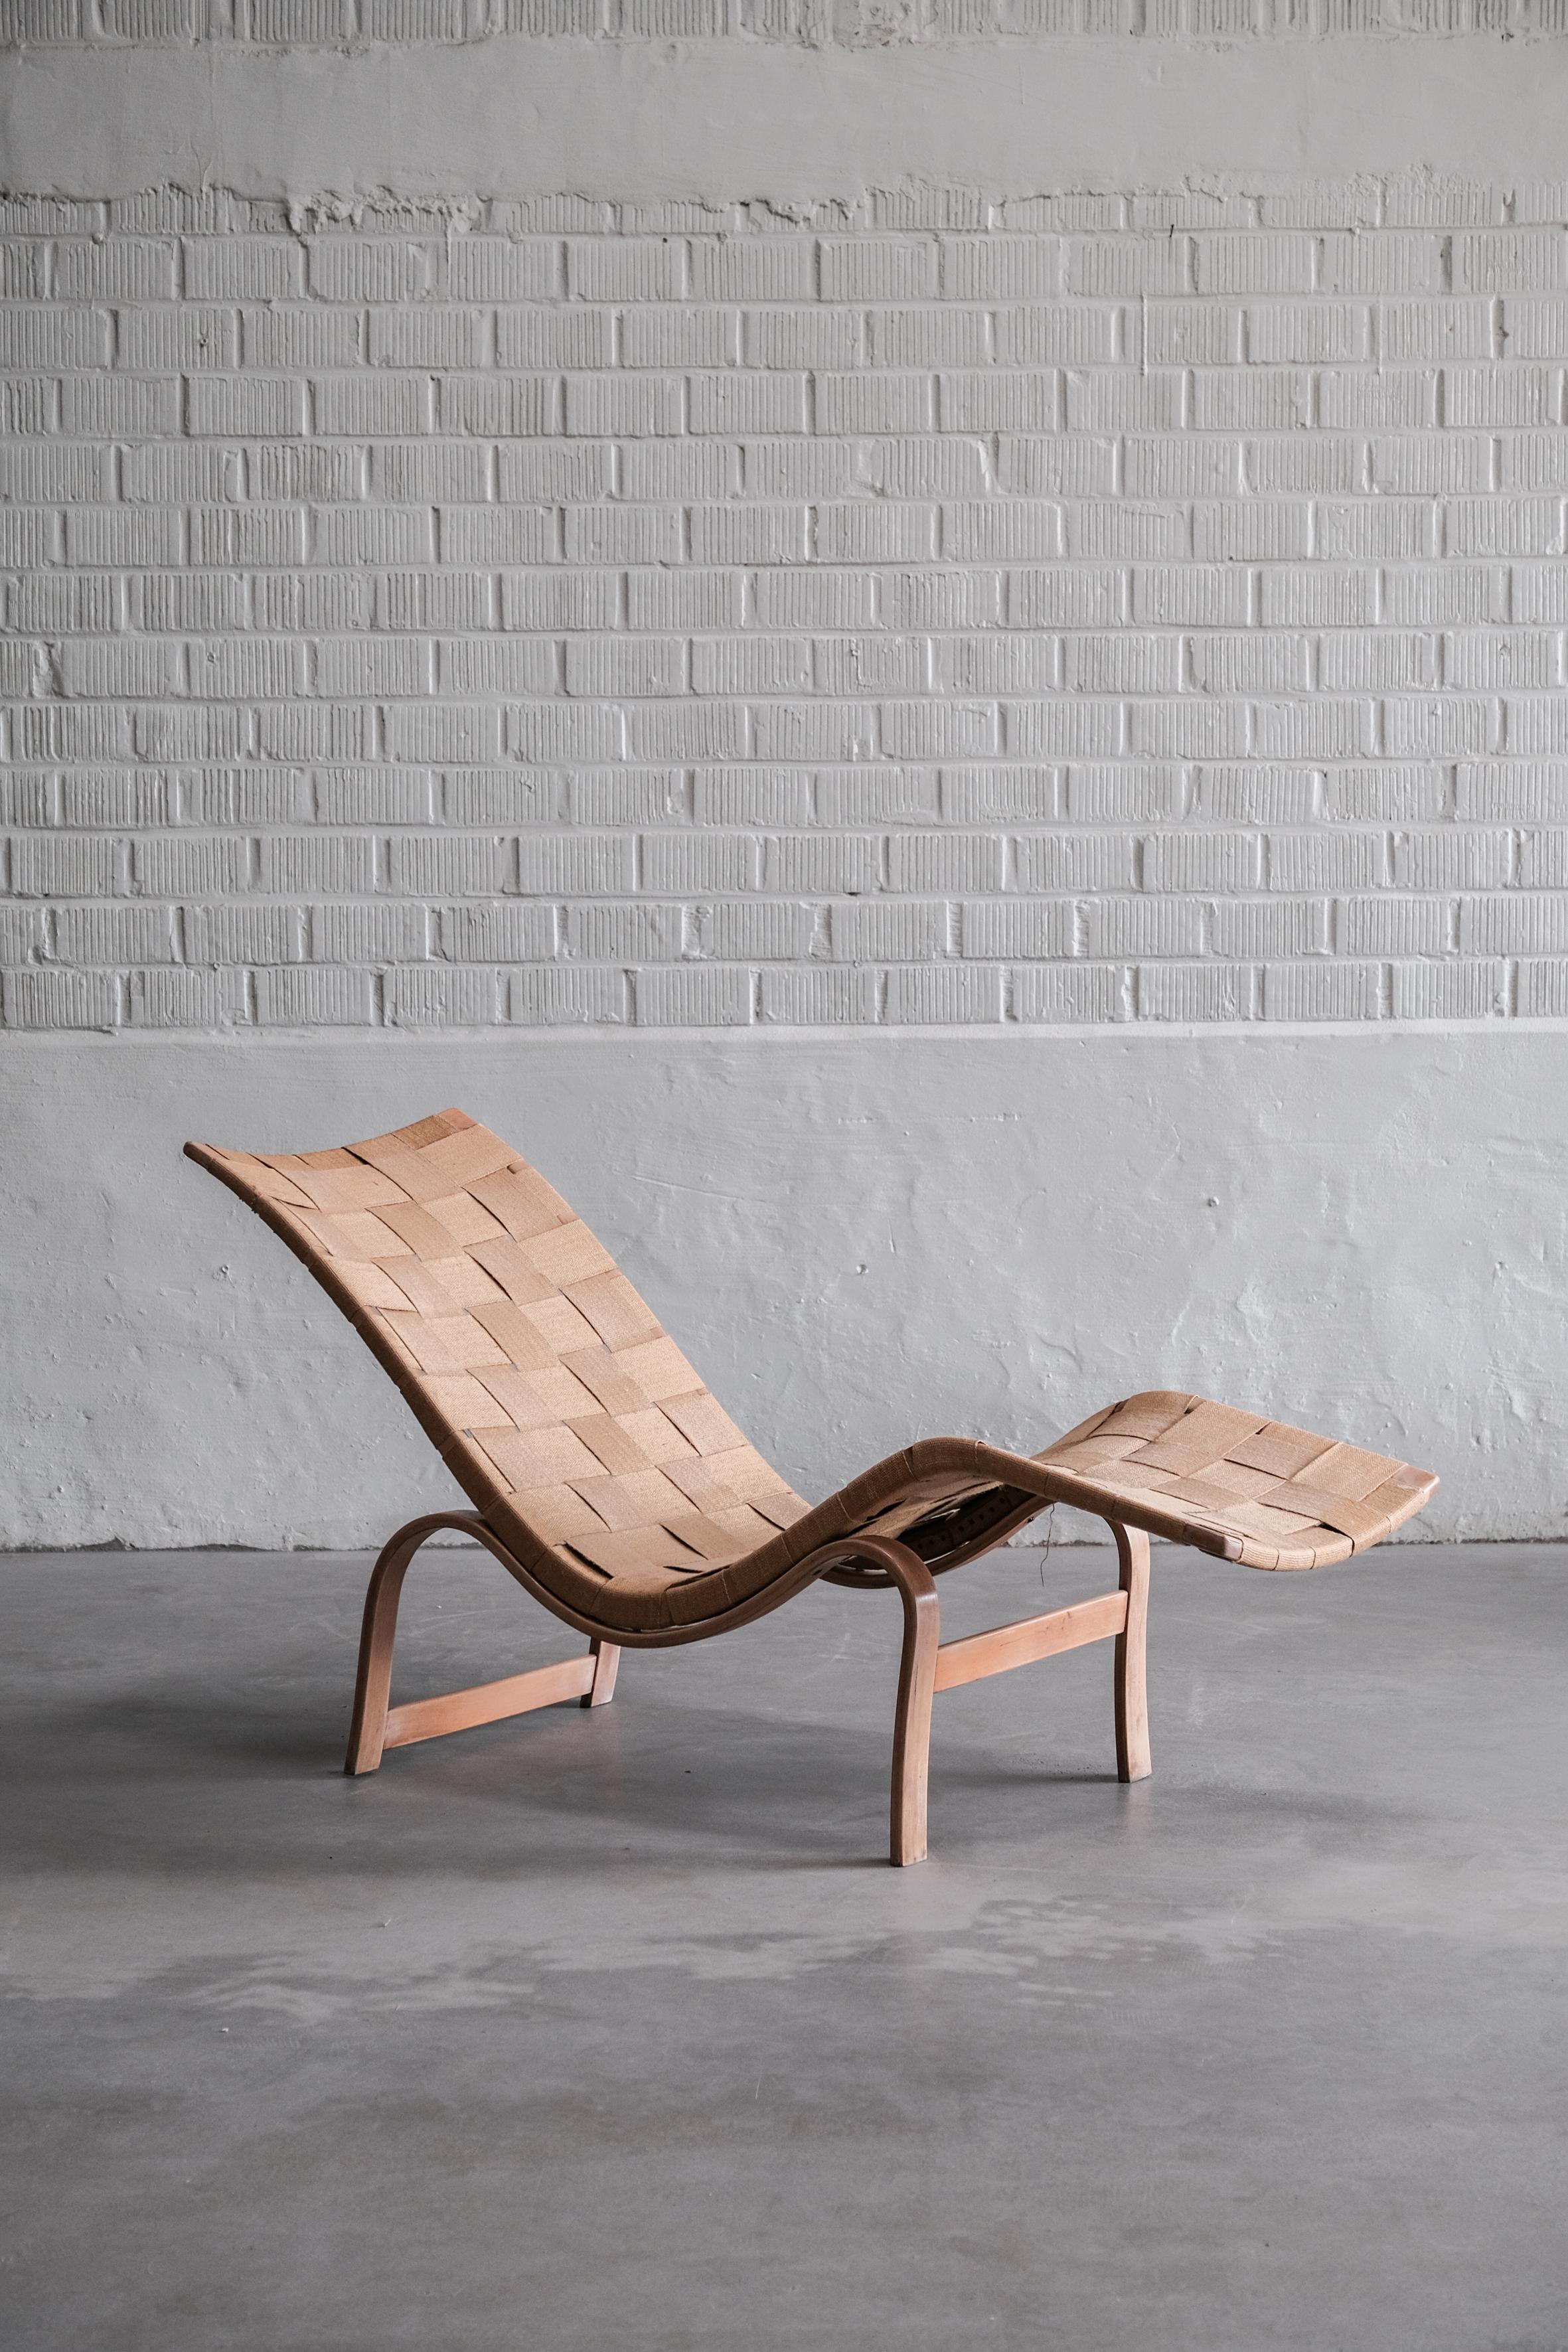 Very ealier edition of this unique and rare lounge chair. 

About the creators:

Bruno Mathsson was born in 1907 in Värnamo, Sweden. His father, Karl, was a fourth-generation master cabinetmaker, so Bruno was exposed early on to the possibilities of